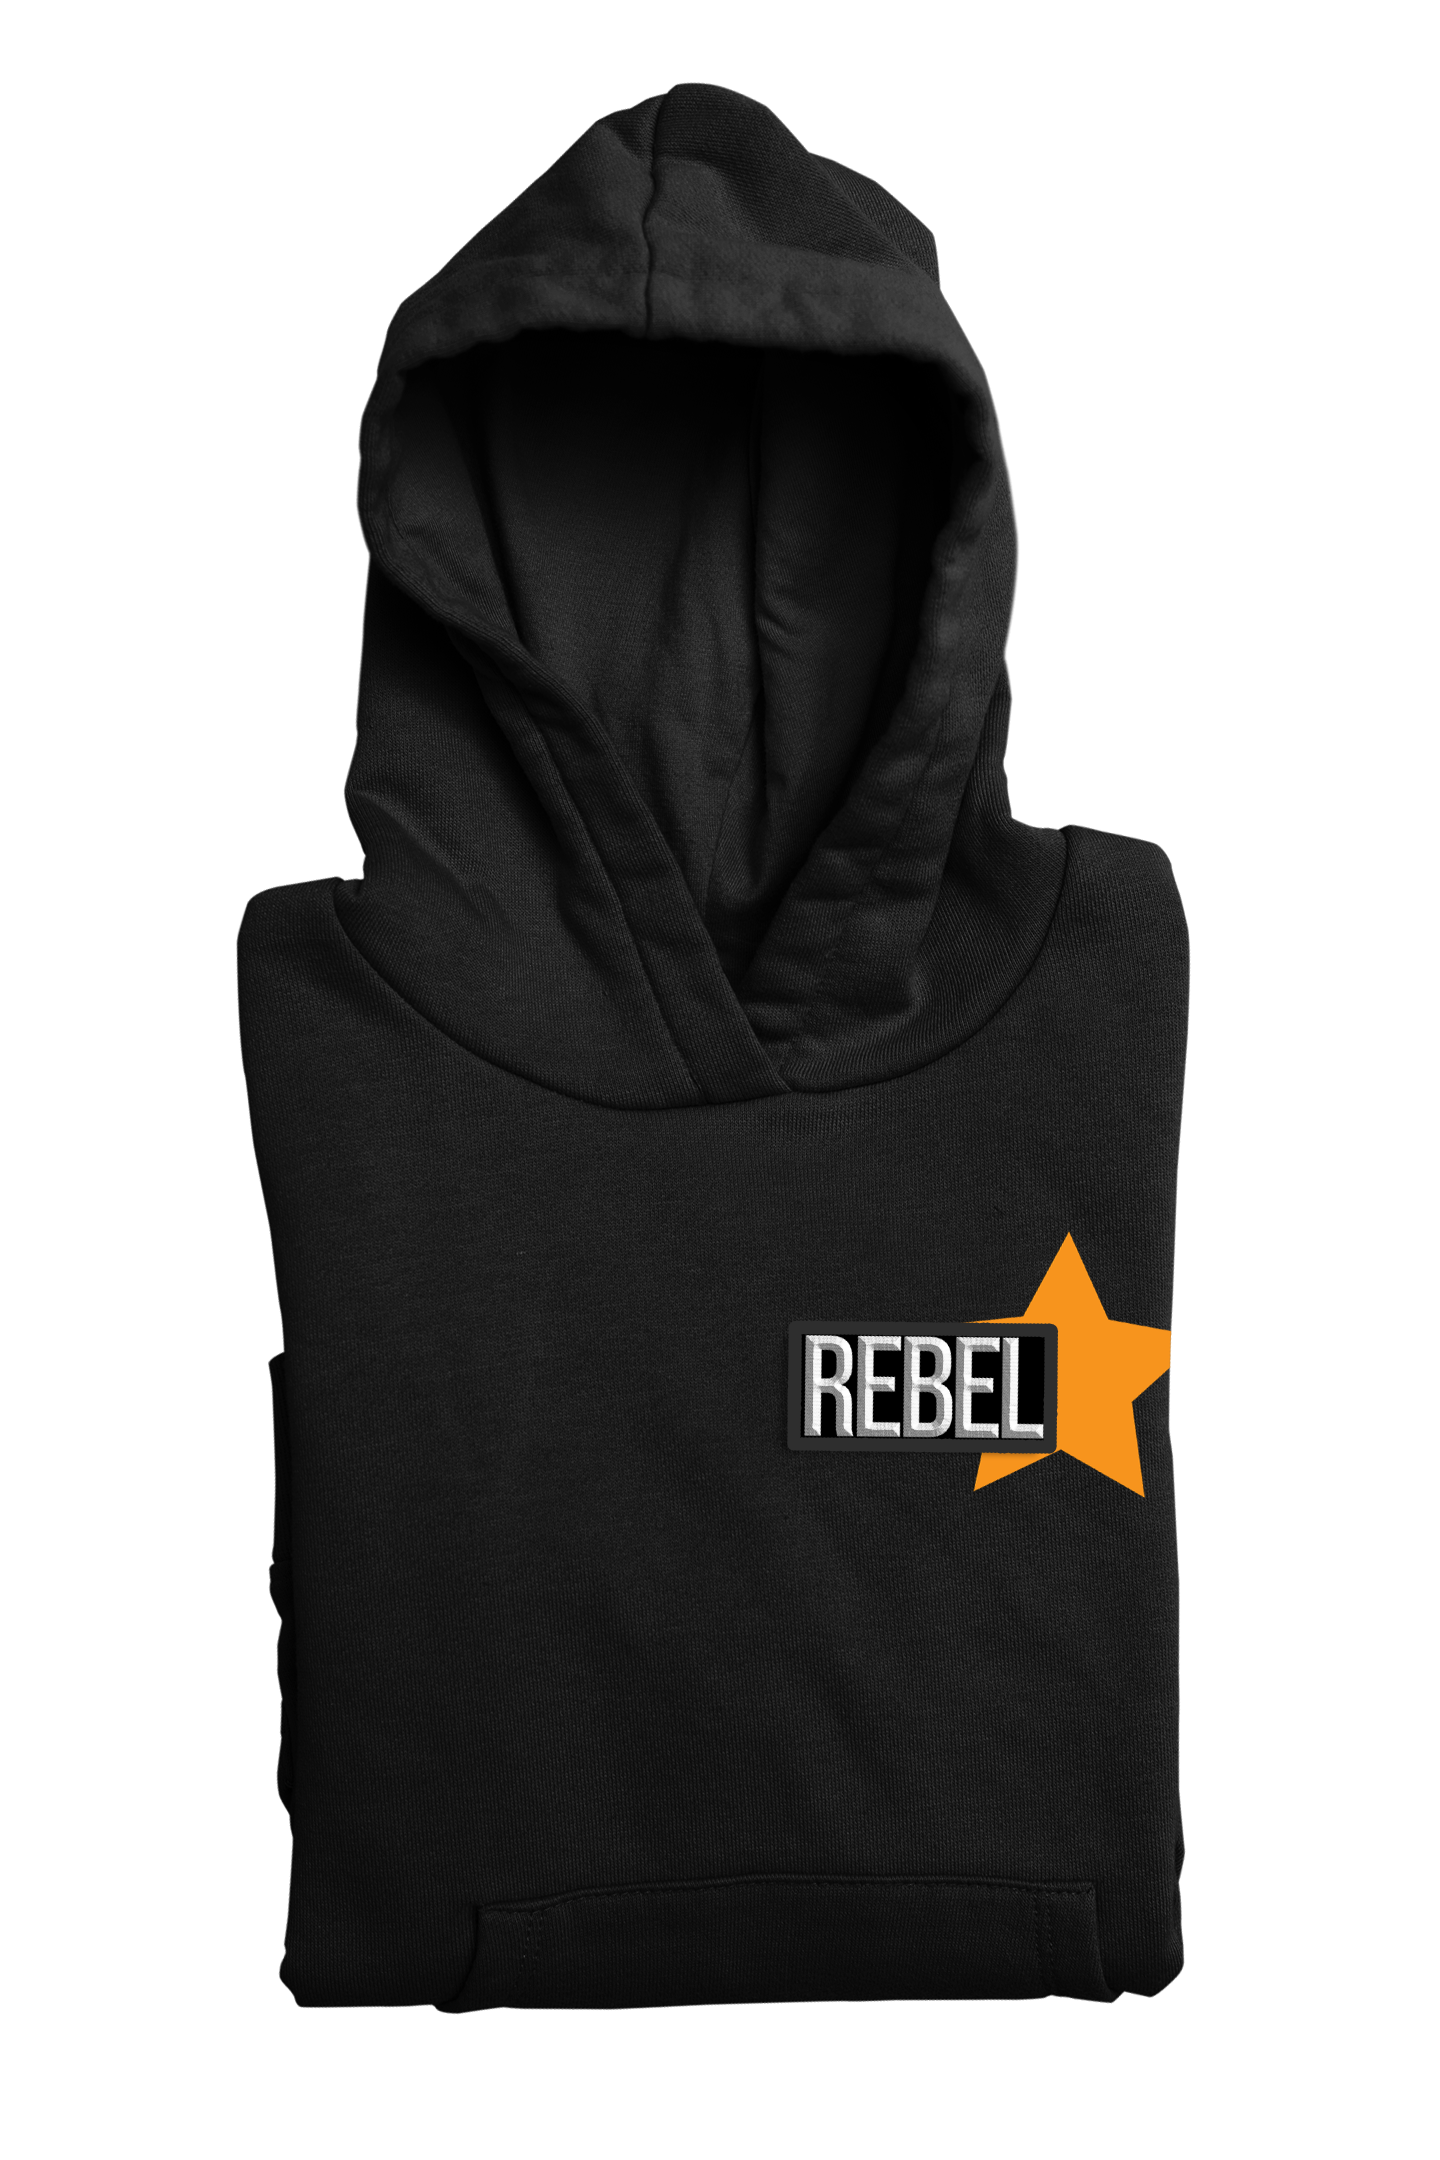 Rebel Star Special Edition Embroidered Unisex Hoodie - Mad Monkey